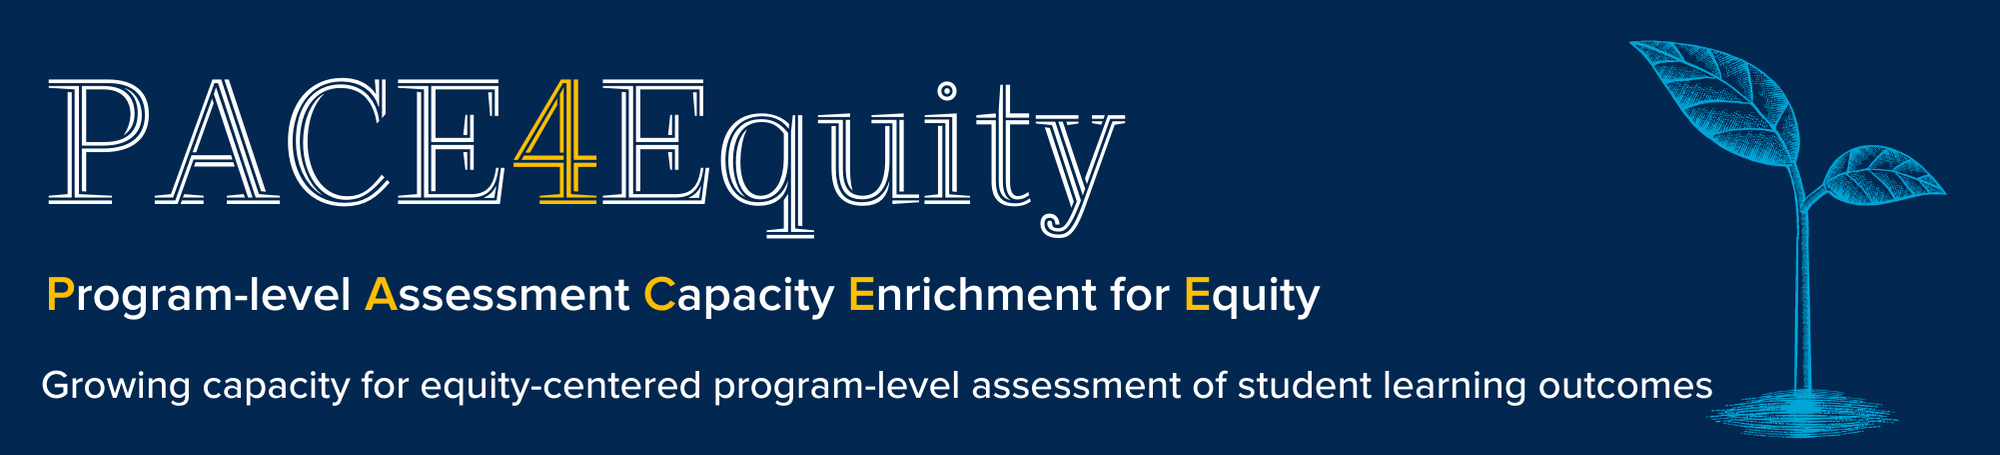 PACE4Equity - Program-level assessment capacity enrichment for equity.  Growing capacity for equity-centered program-level assessment of student learning outcomes.